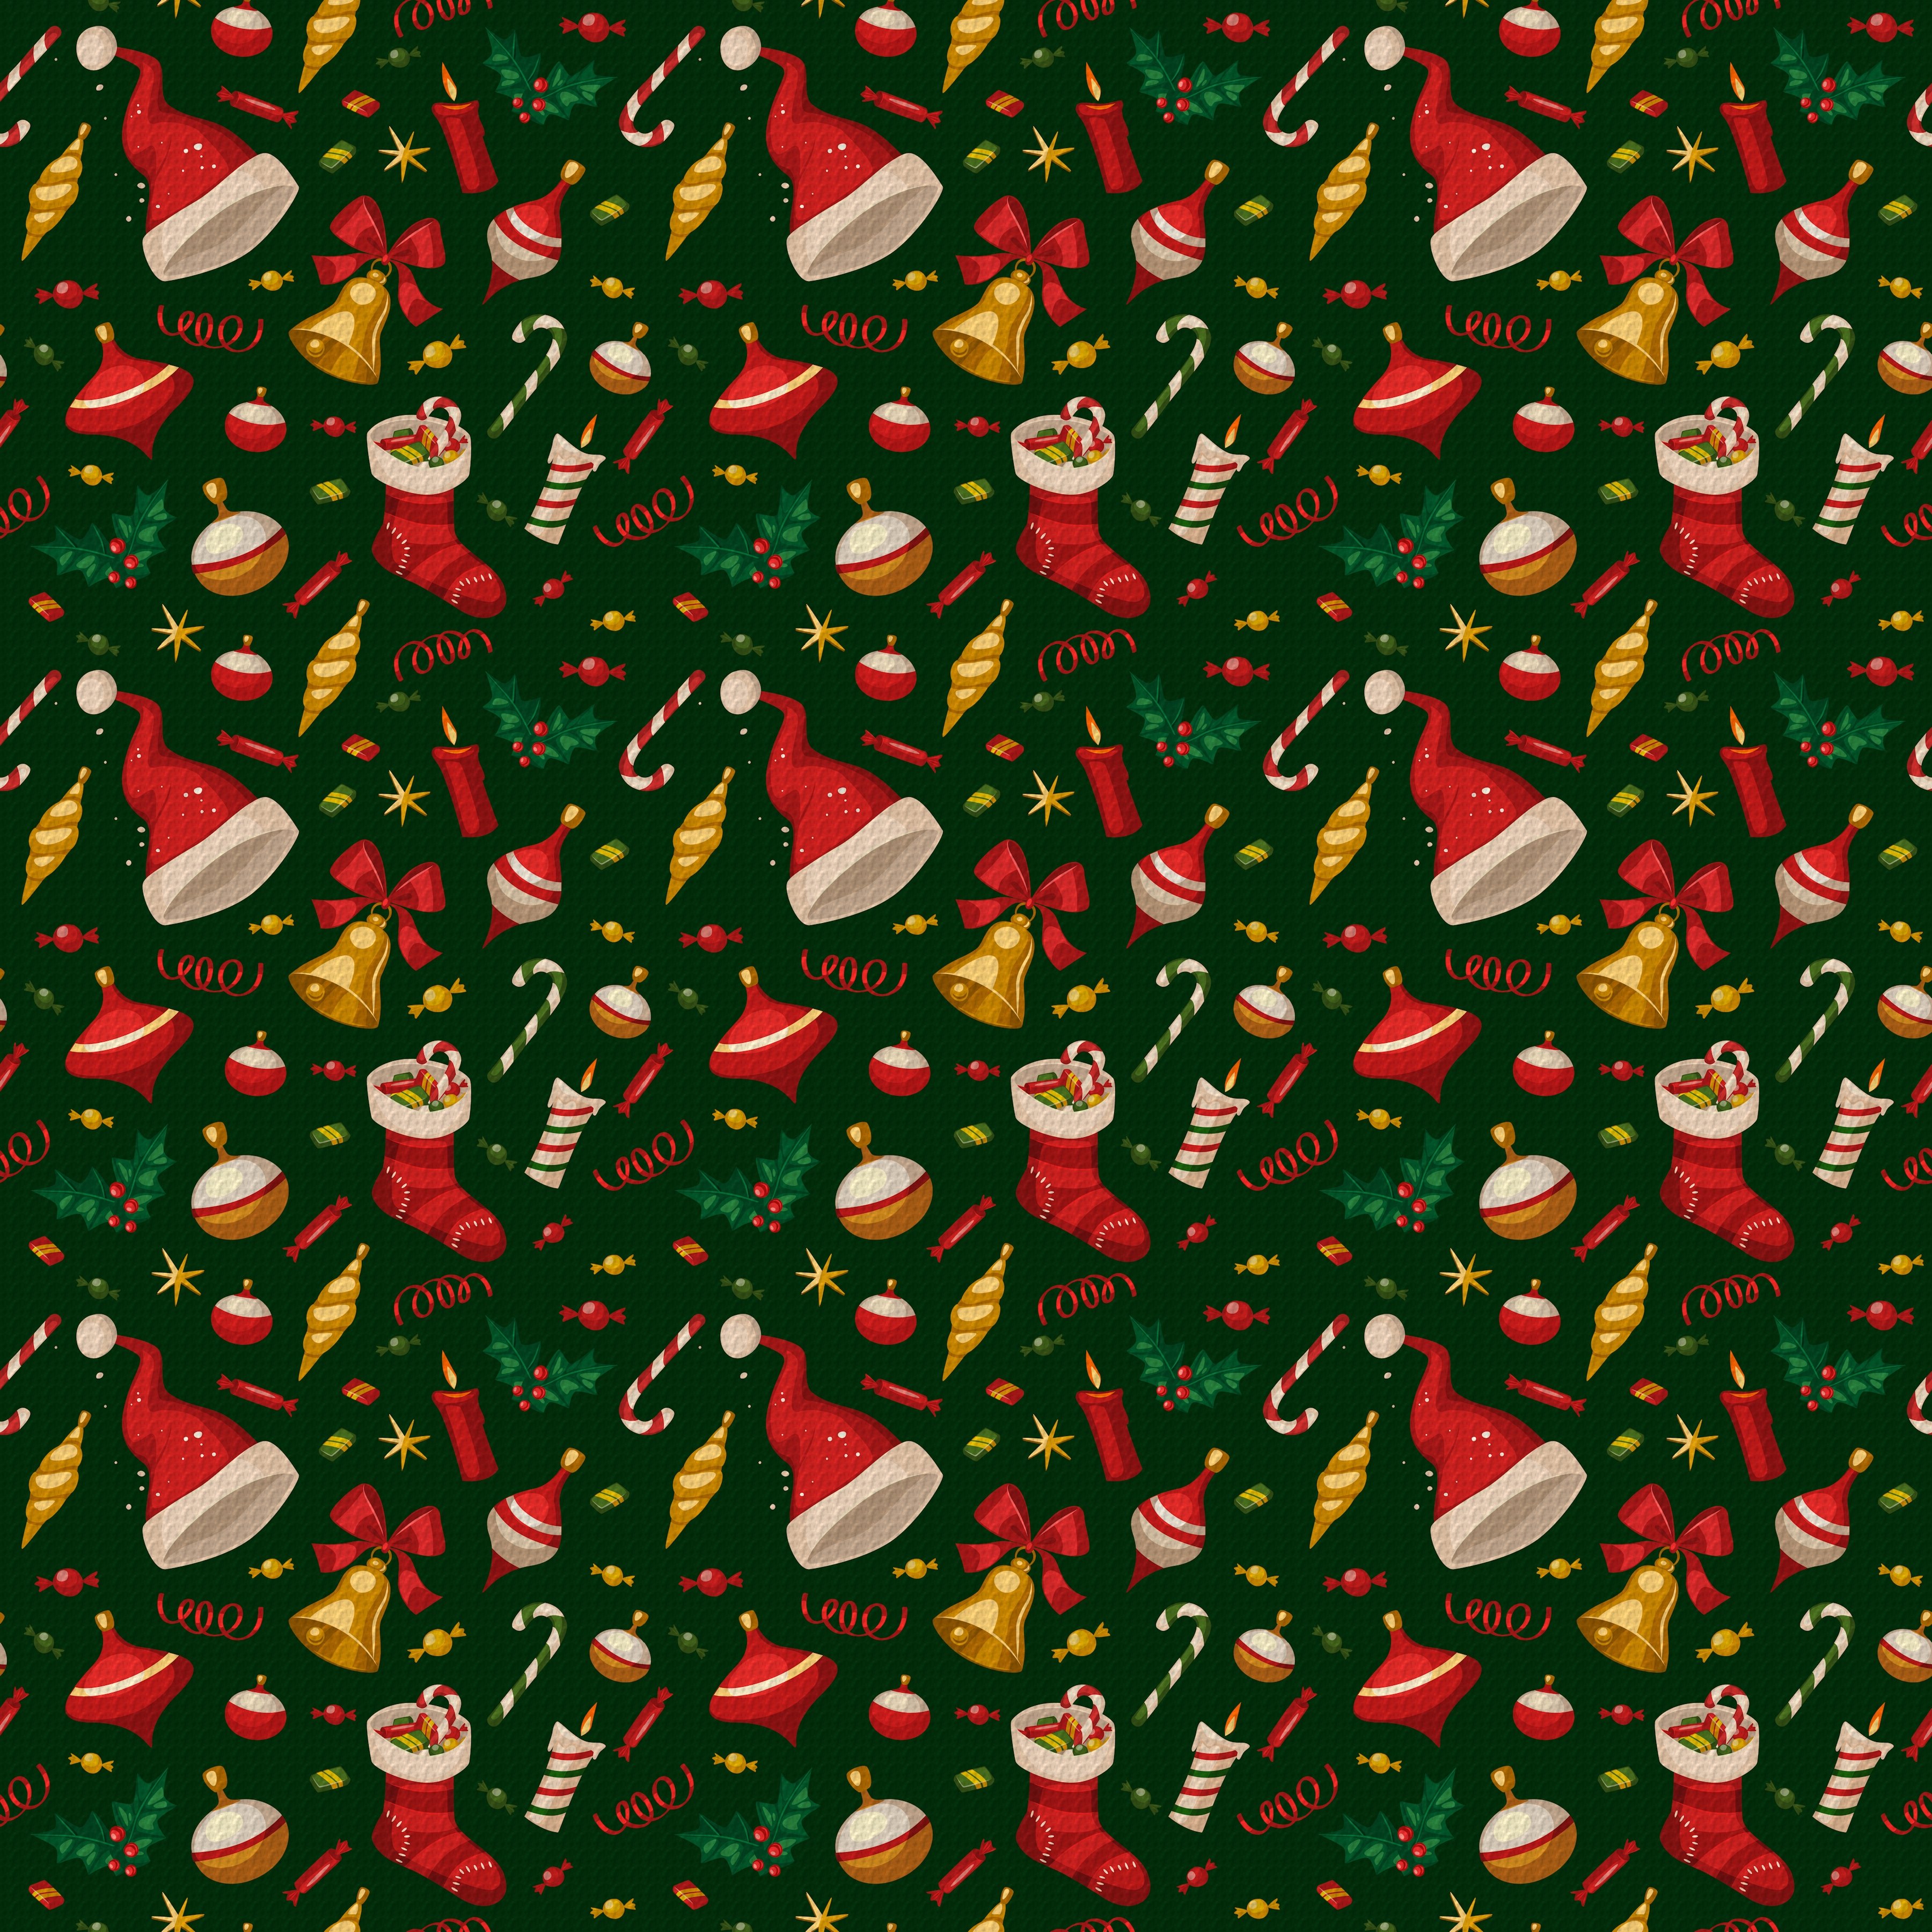 Christmas Pattern 2 2014 | St. Colmcille's N.S., Ballinahown